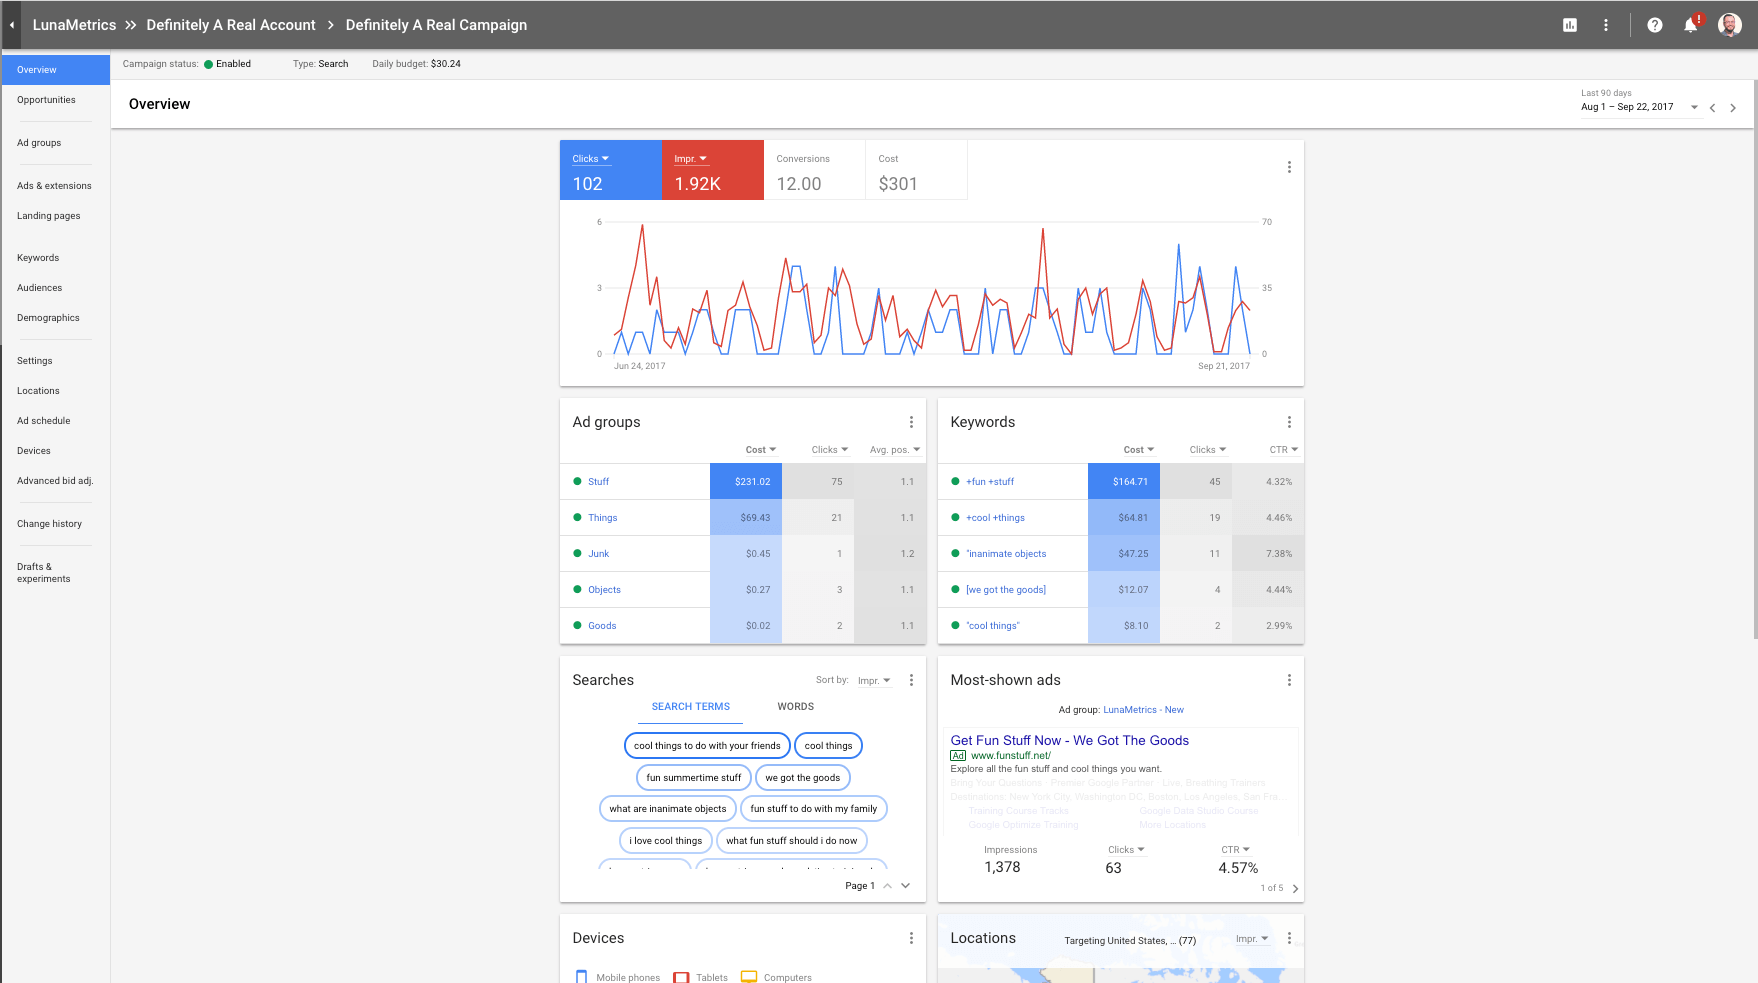 Google AdWords Next Campaign Overview Reports